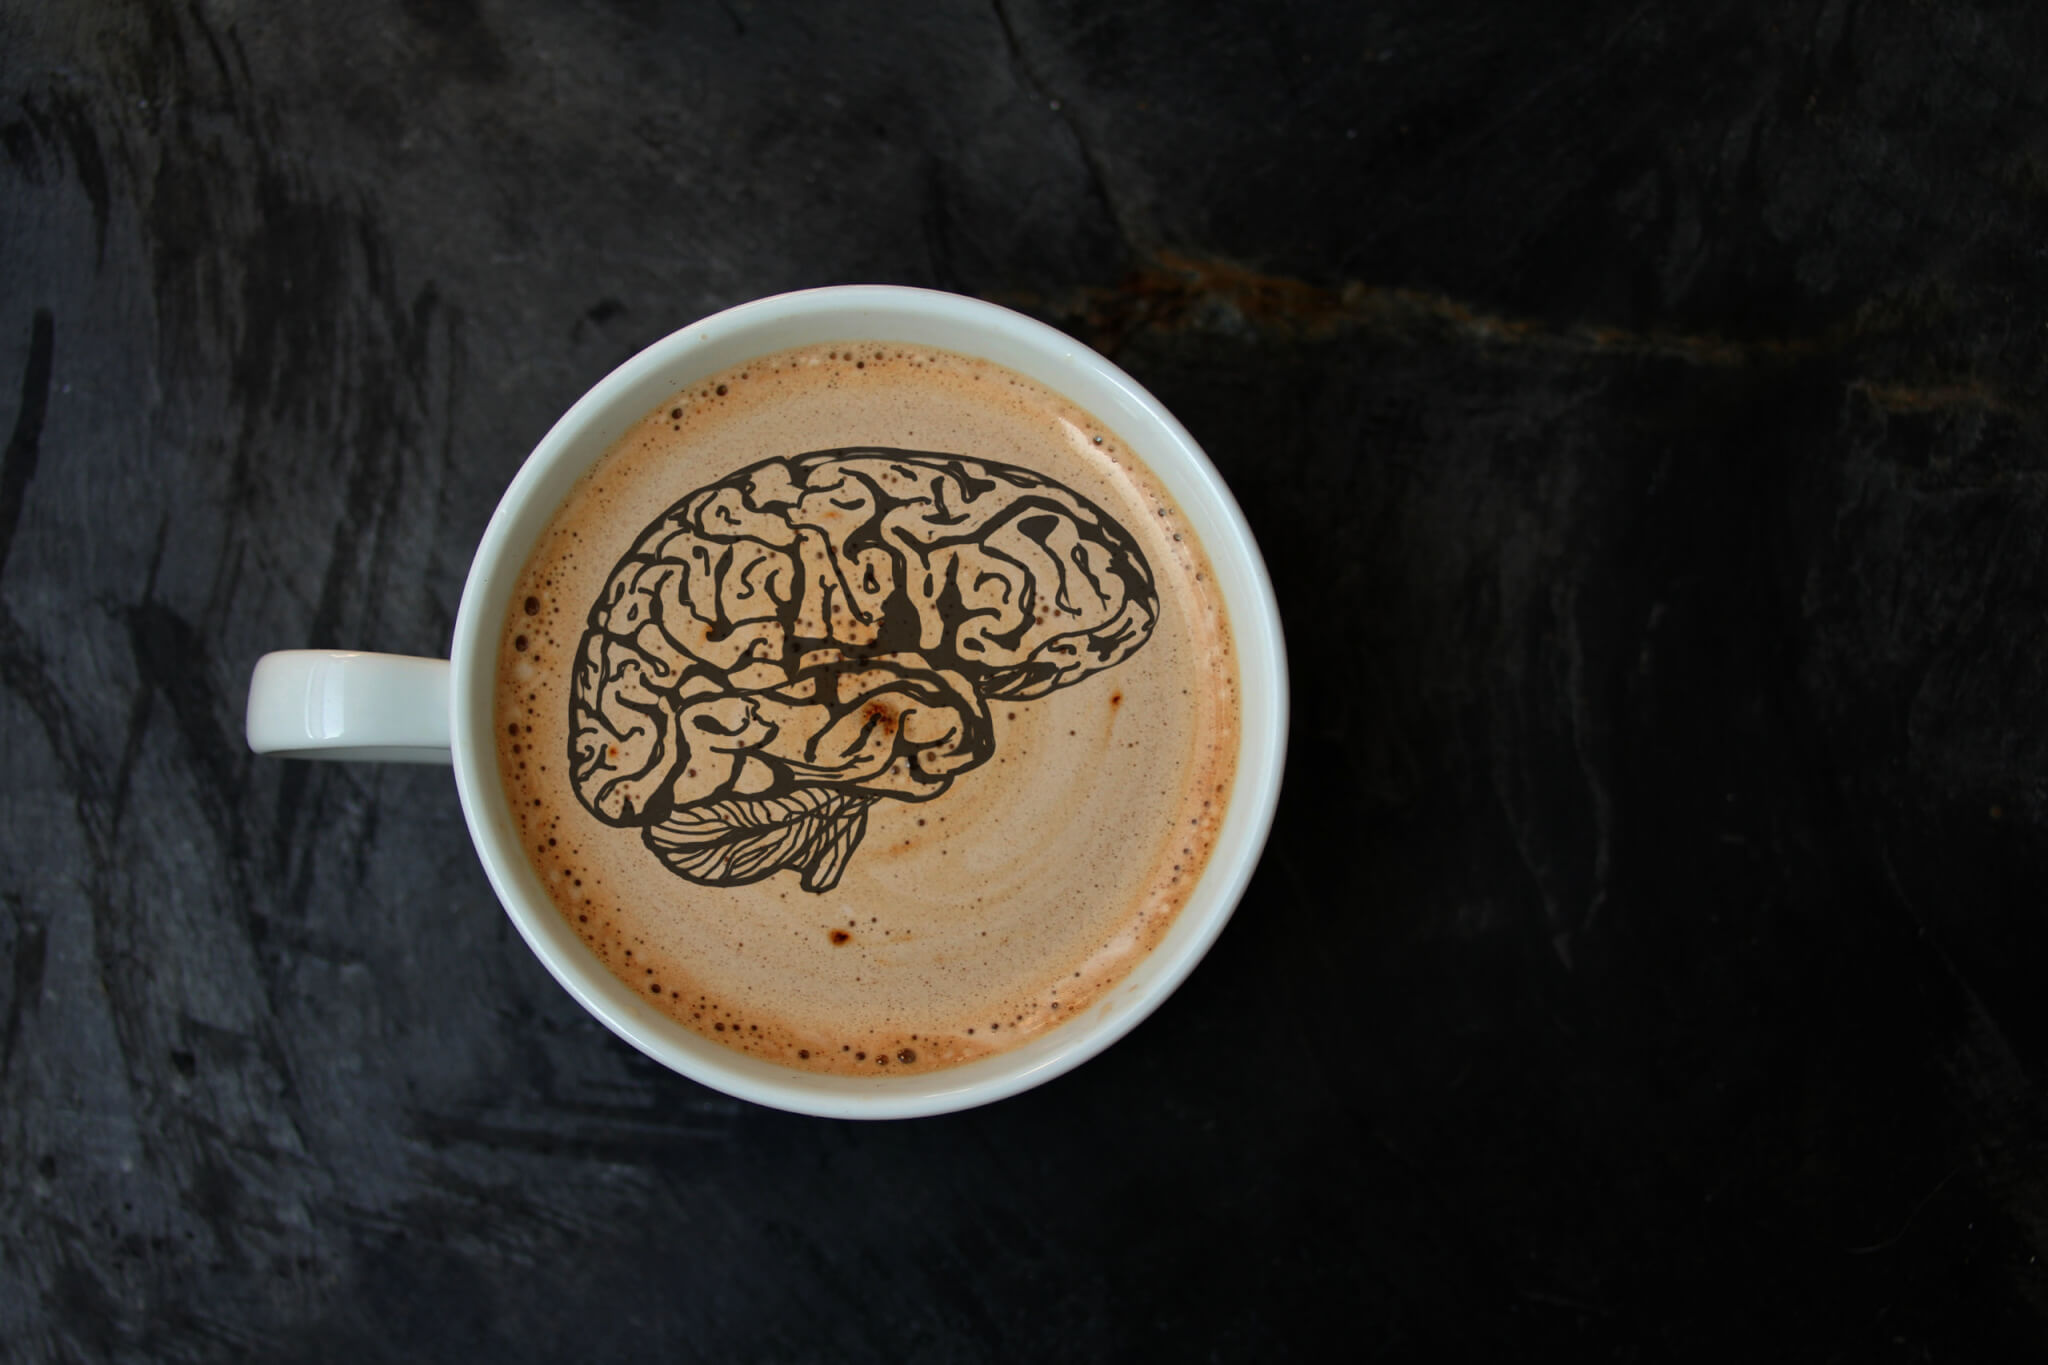 Too much coffee can cause your brain to shrink, raise dementia risk by 53 percent!